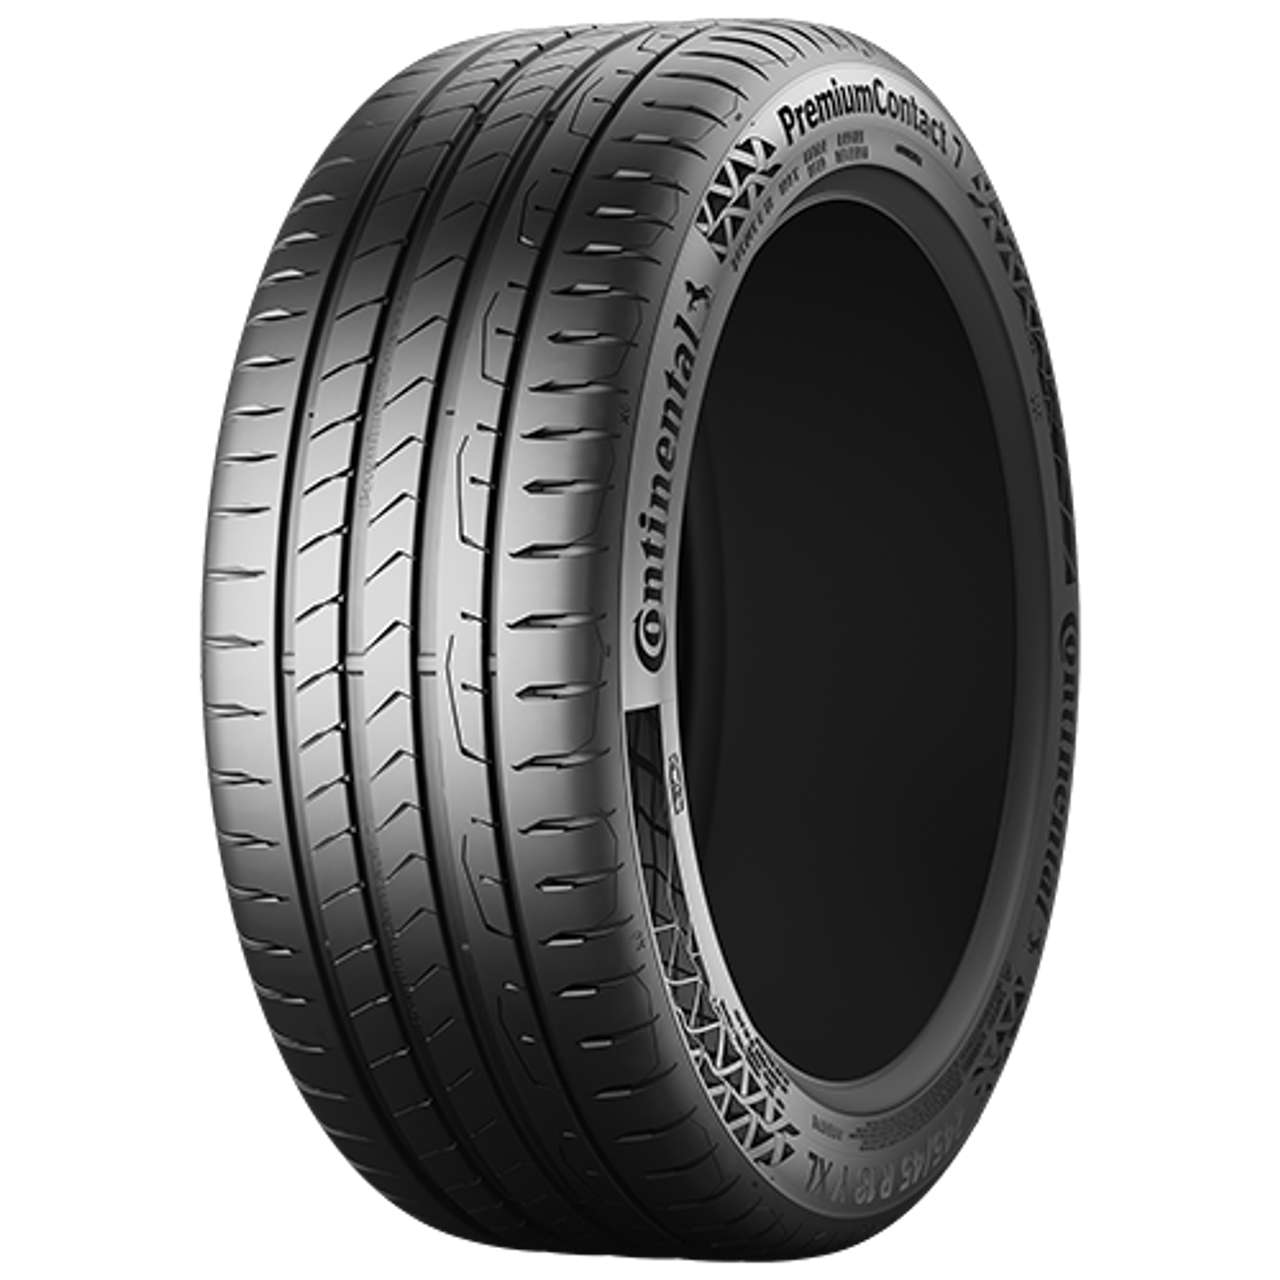 CONTINENTAL PREMIUMCONTACT 7 (EVc) 215/55R17 94V FR BSW